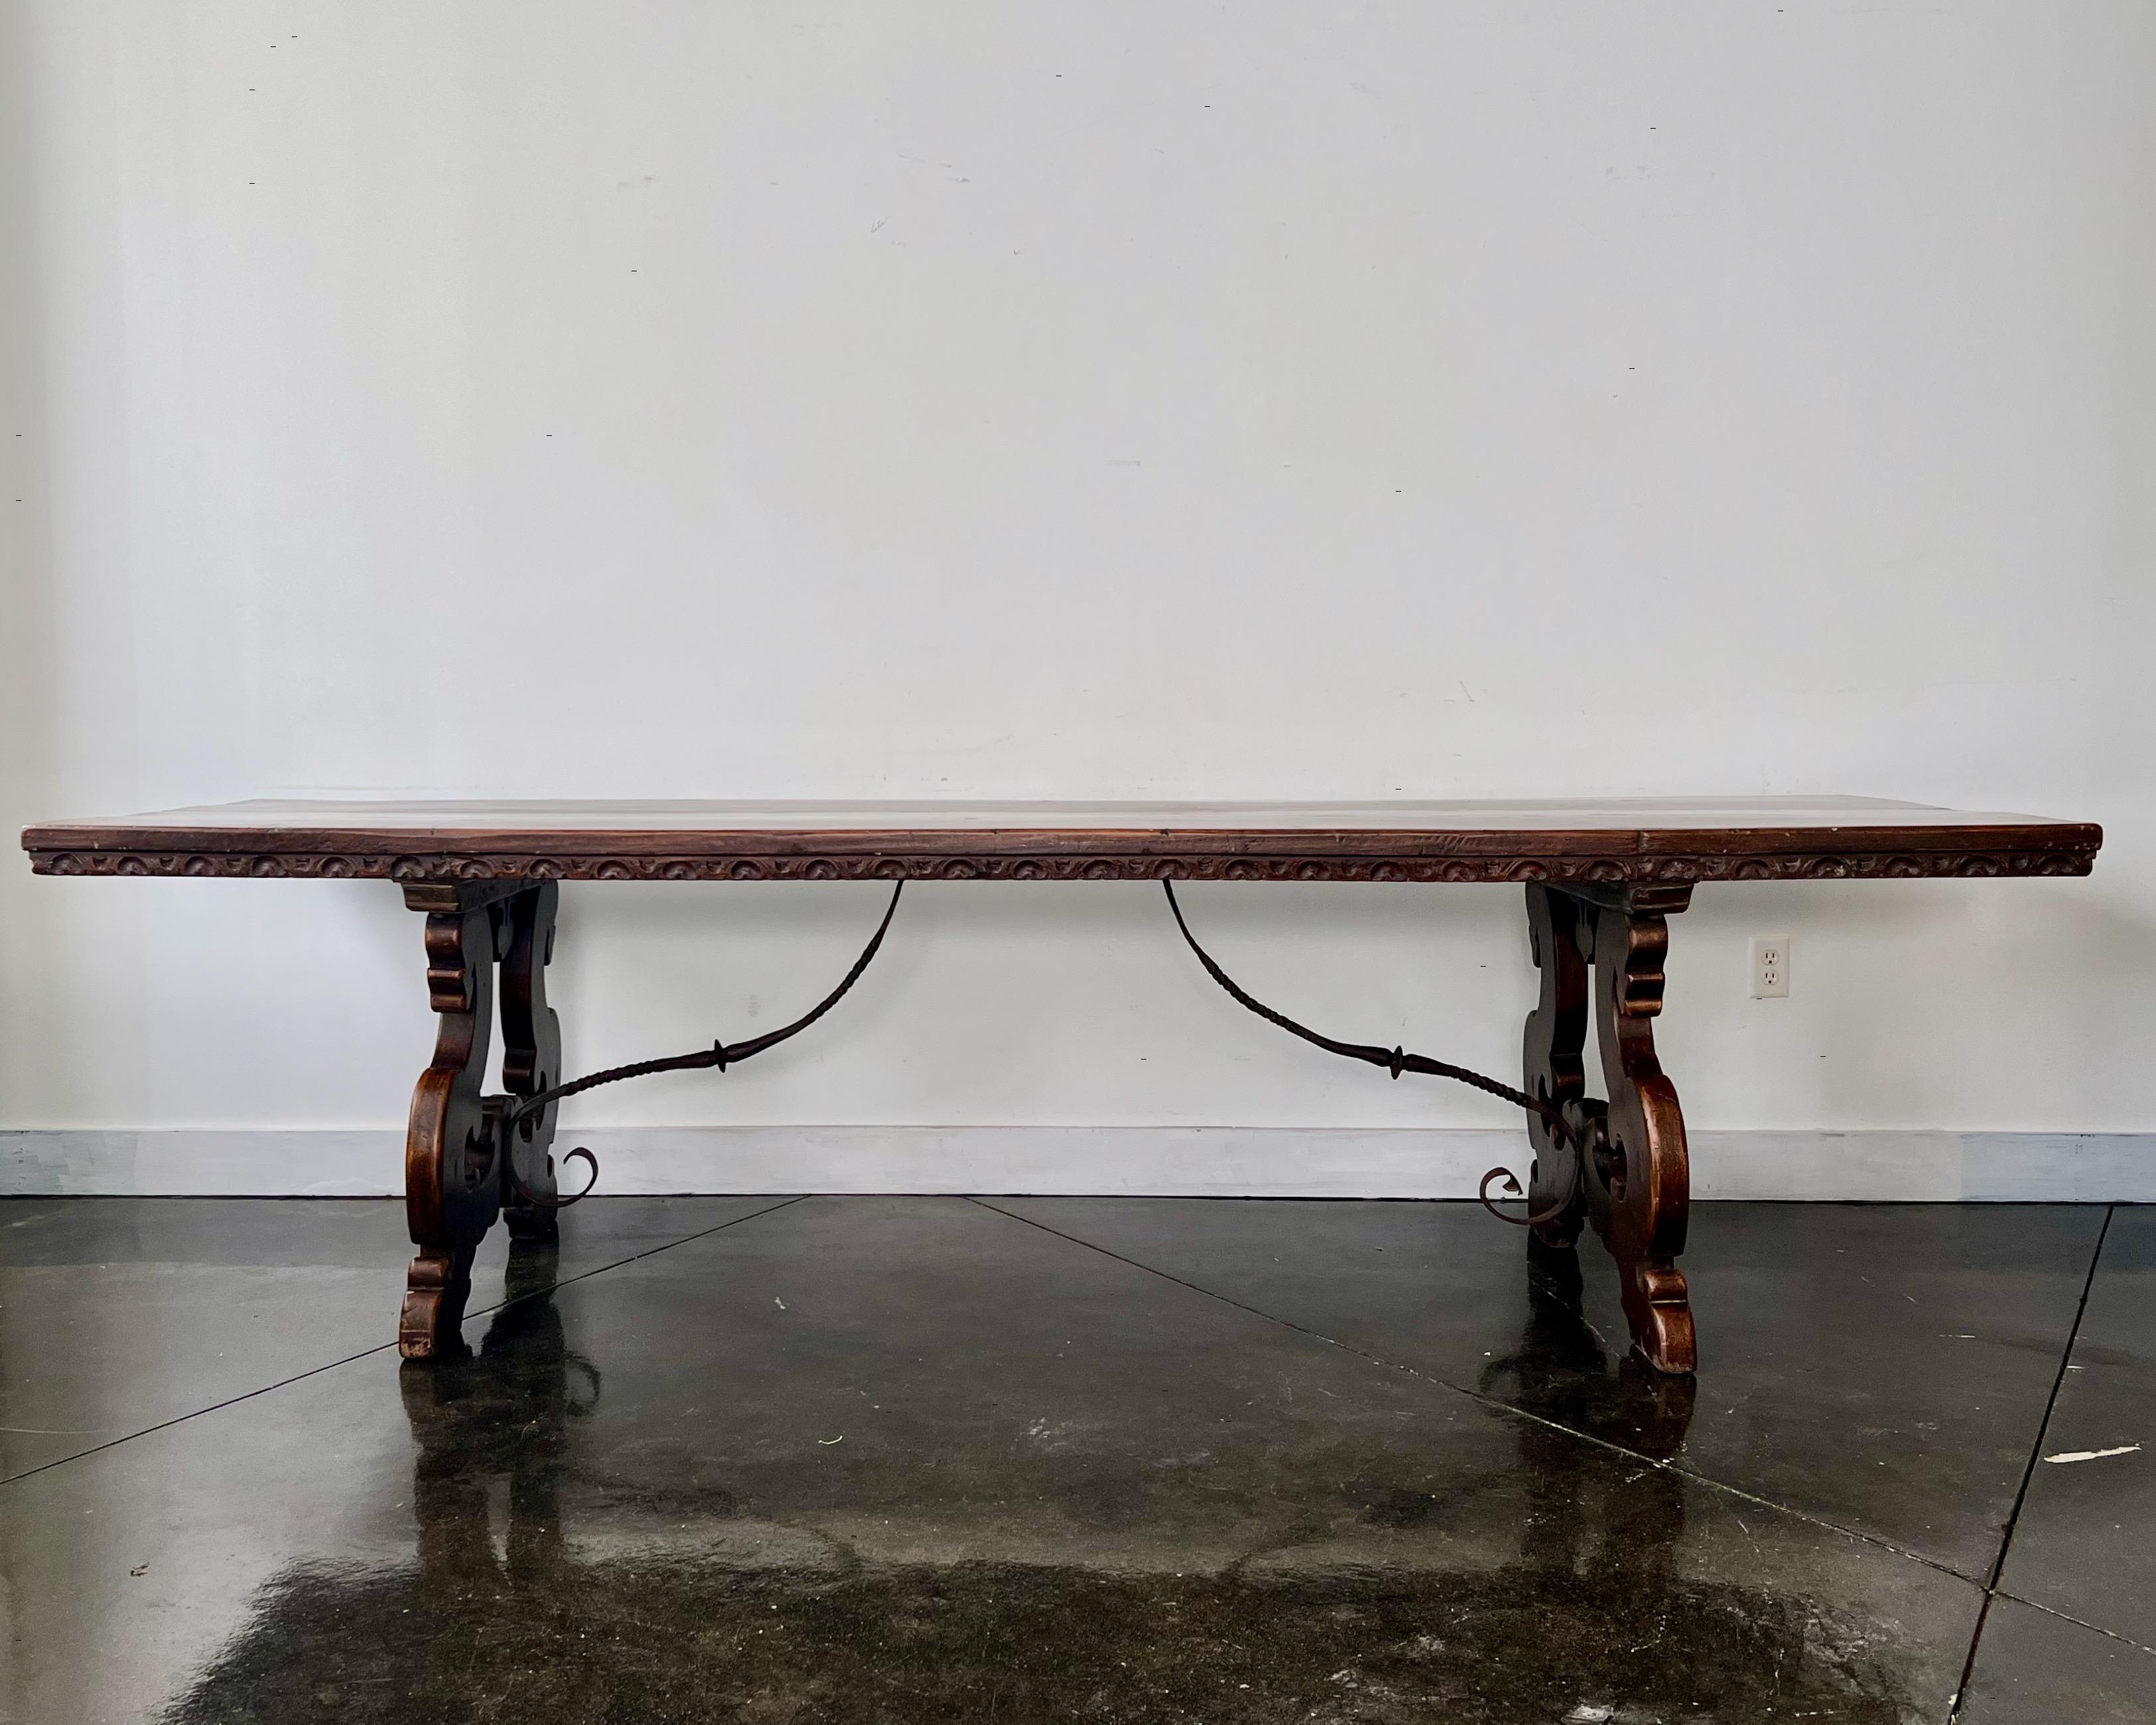 18th century, Florentine Italian walnut dining table with Lyre legs, hand forged iron stretcher base topped with carved edge, long thick walnut top in rich brown patina.
Florence, Italy, 18th century
